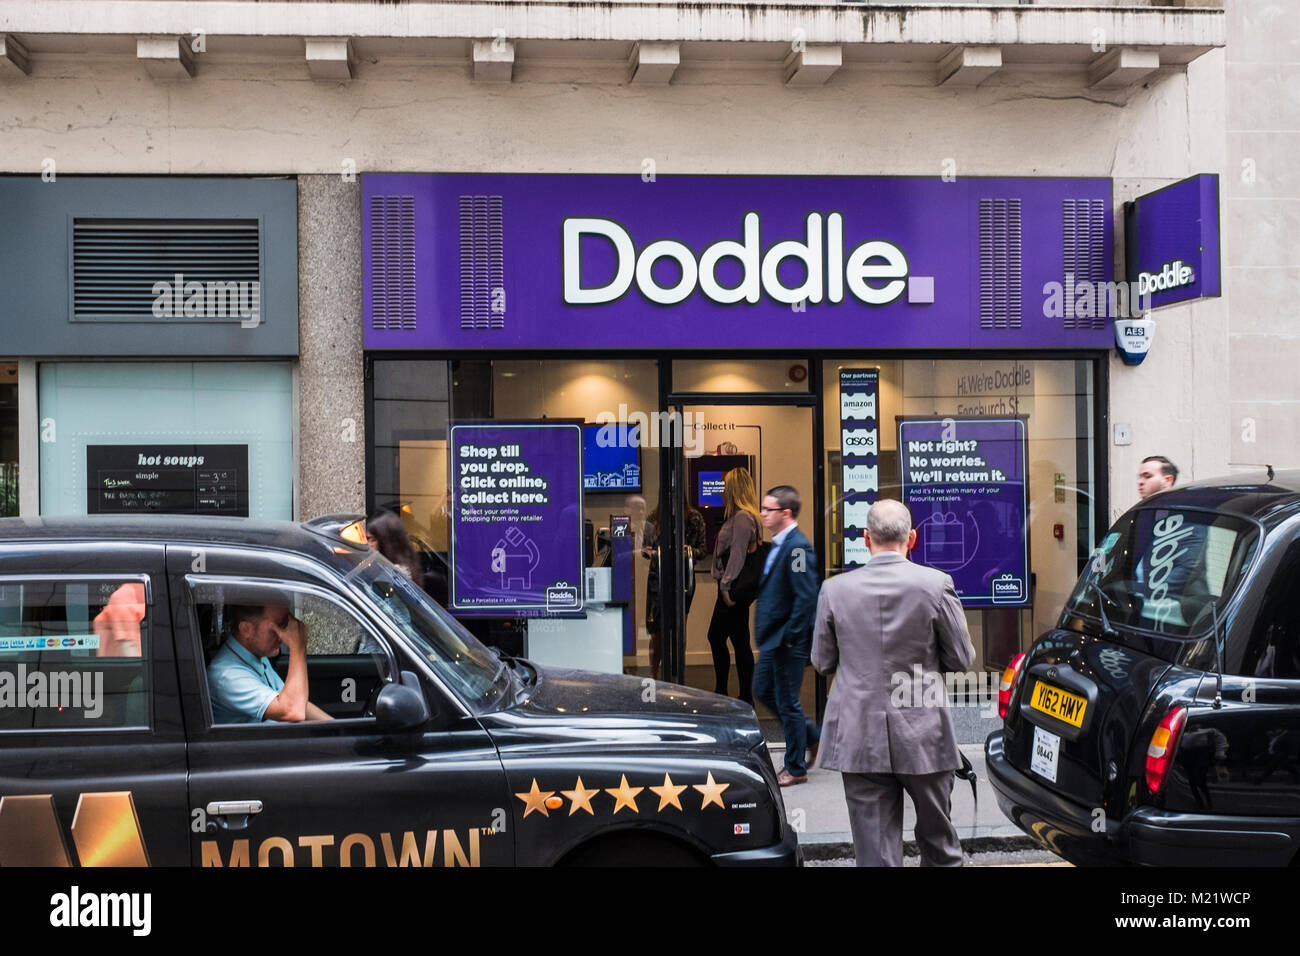 Doddle collection store, Fenchurch street, London, England, U.K. Stock Photo